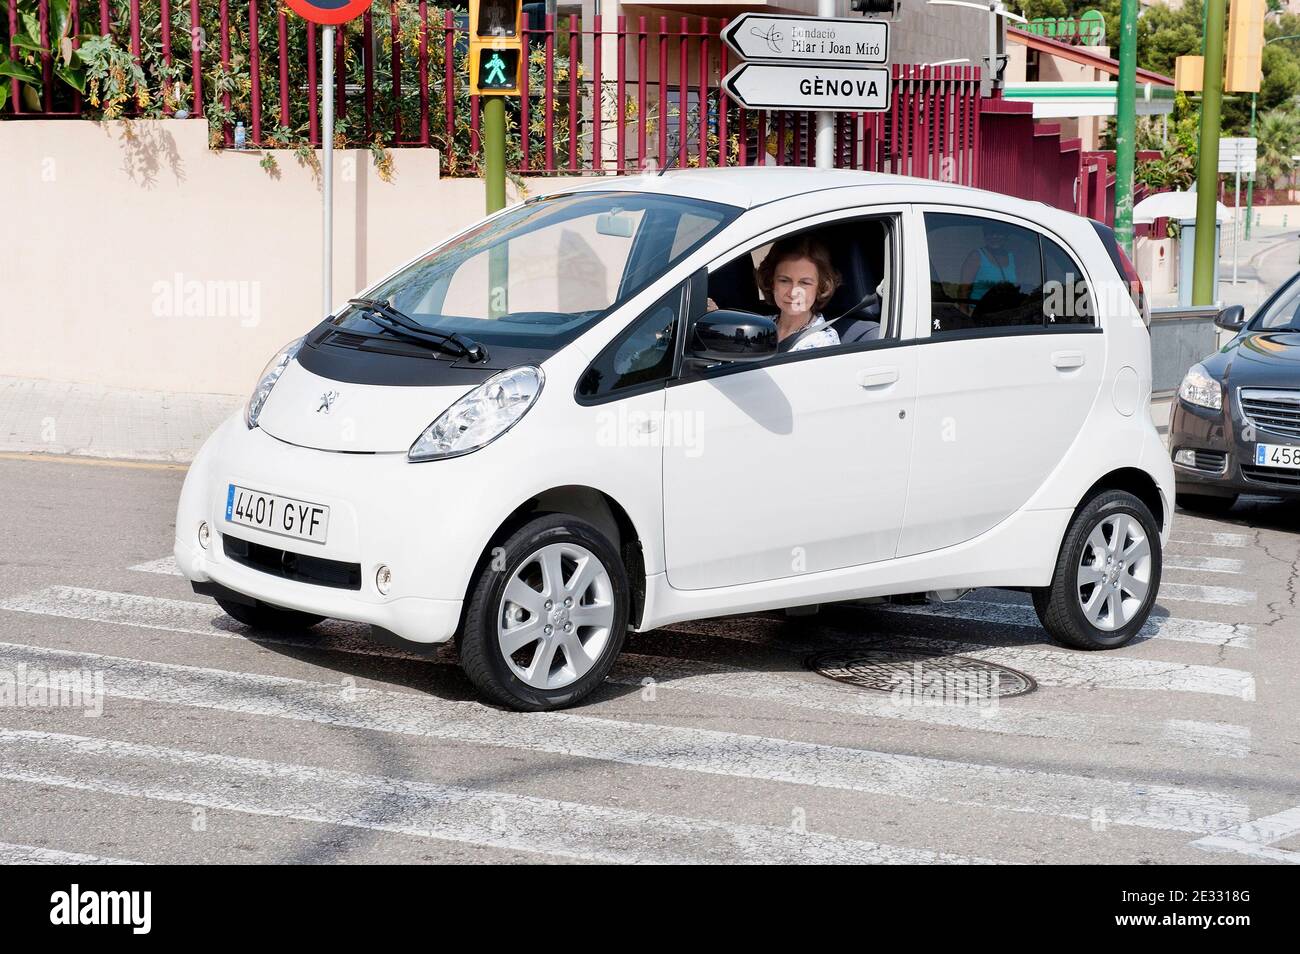 Spain's Queen Sofia drives a new electric car she just took delivery of, in Palma de Mallorca, Balearic Islands, Spain on August 11, 2010. The car, a Peugeot iON, has been lent to Queen SofÀa by the car company and was sent by air to Palma from Japan. The Queen will drive it for her private use for one month during her vacation at Marivent Palace on Mallorca. QueenæSofÀa has accepted the assignment as a show of support for electric cars as not pollutant vehicles respecting the environment. For security reasons the Queen was followed by two larger dark cars carrying her security detail. Photo b Stock Photo